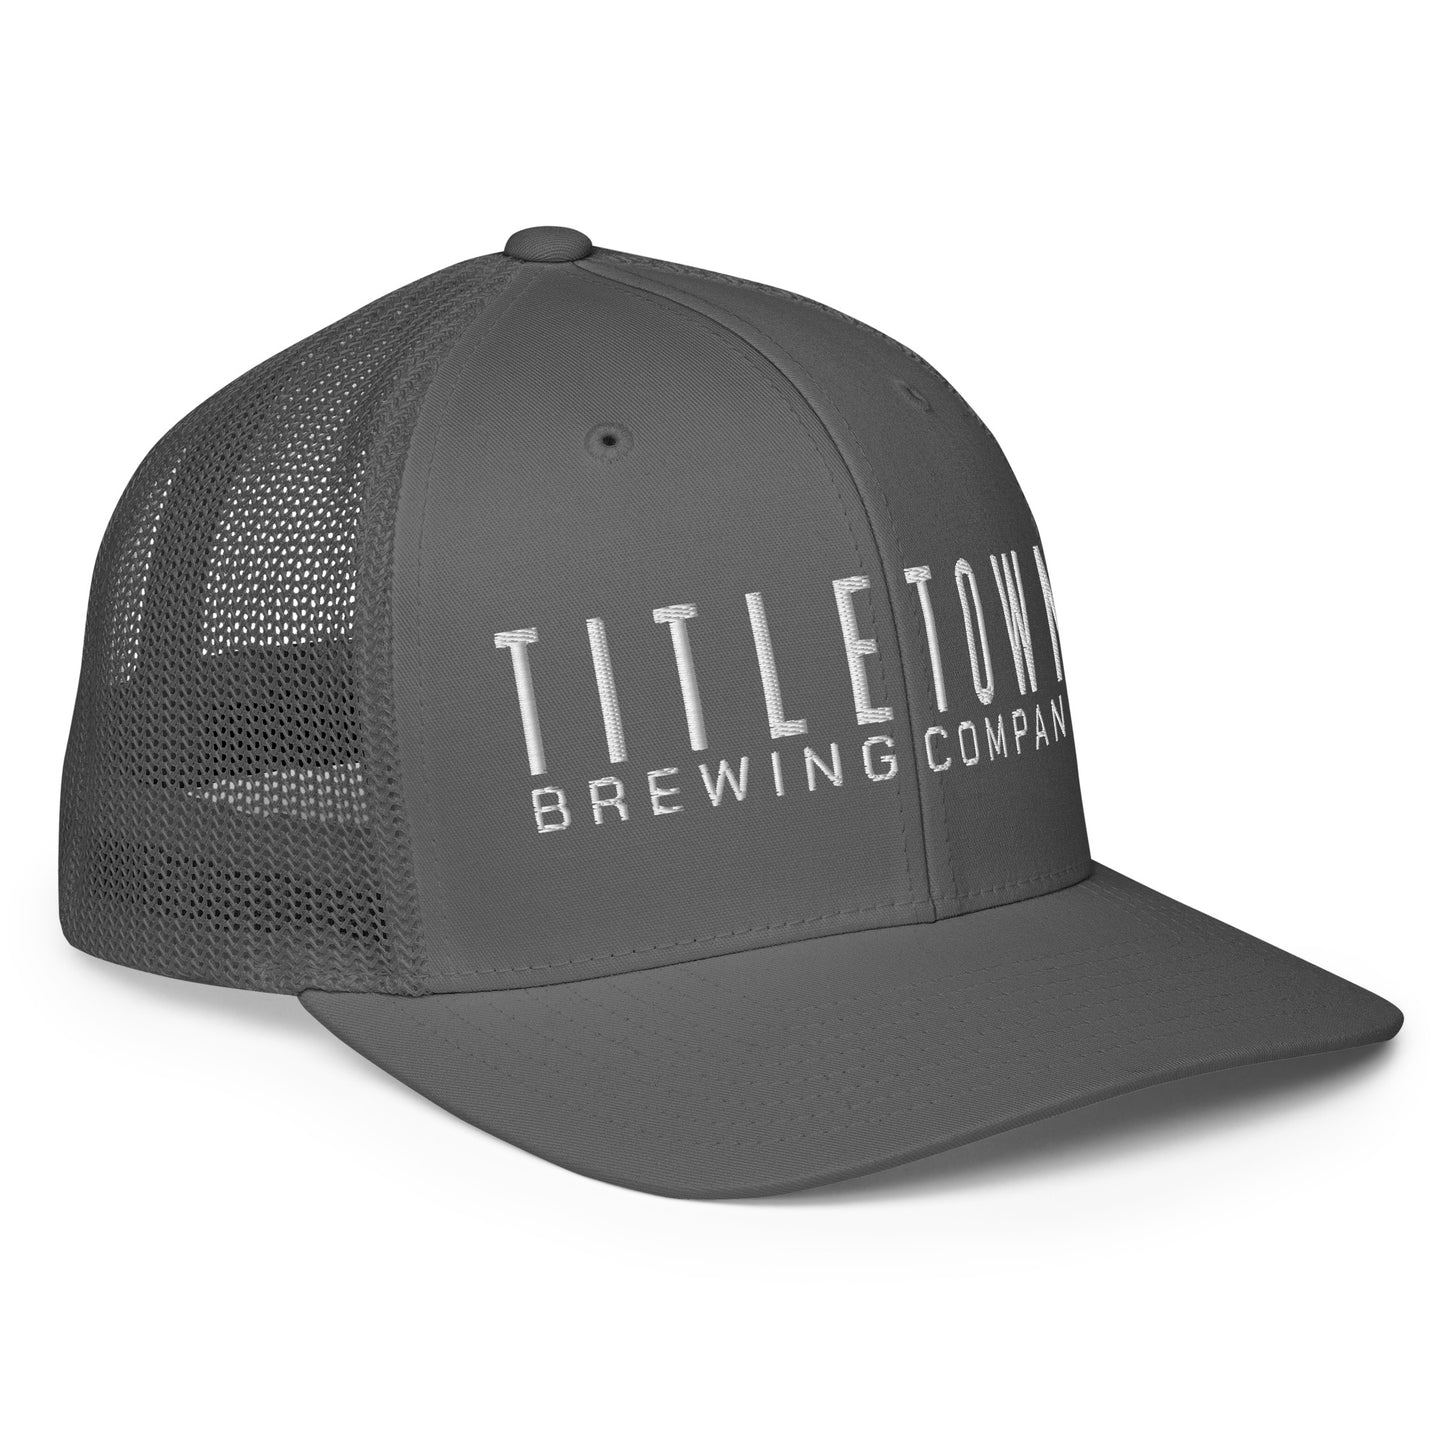 Titletown Brewing Company Closed-back trucker cap